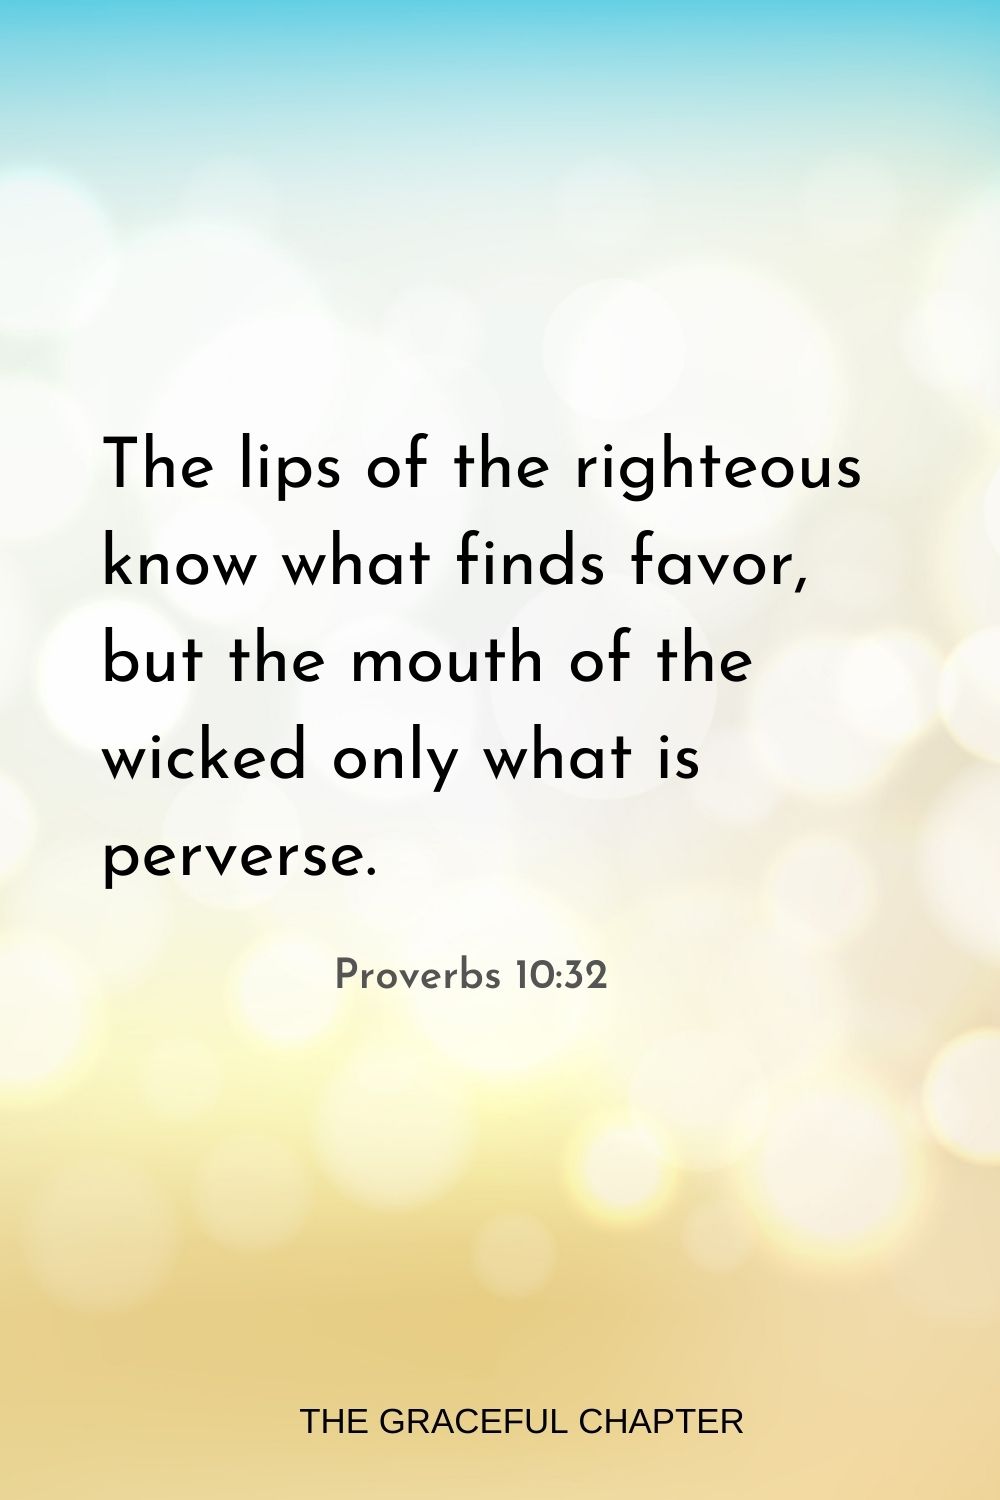 The lips of the righteous know what finds favor, but the mouth of the wicked only what is perverse. Proverbs 10:32